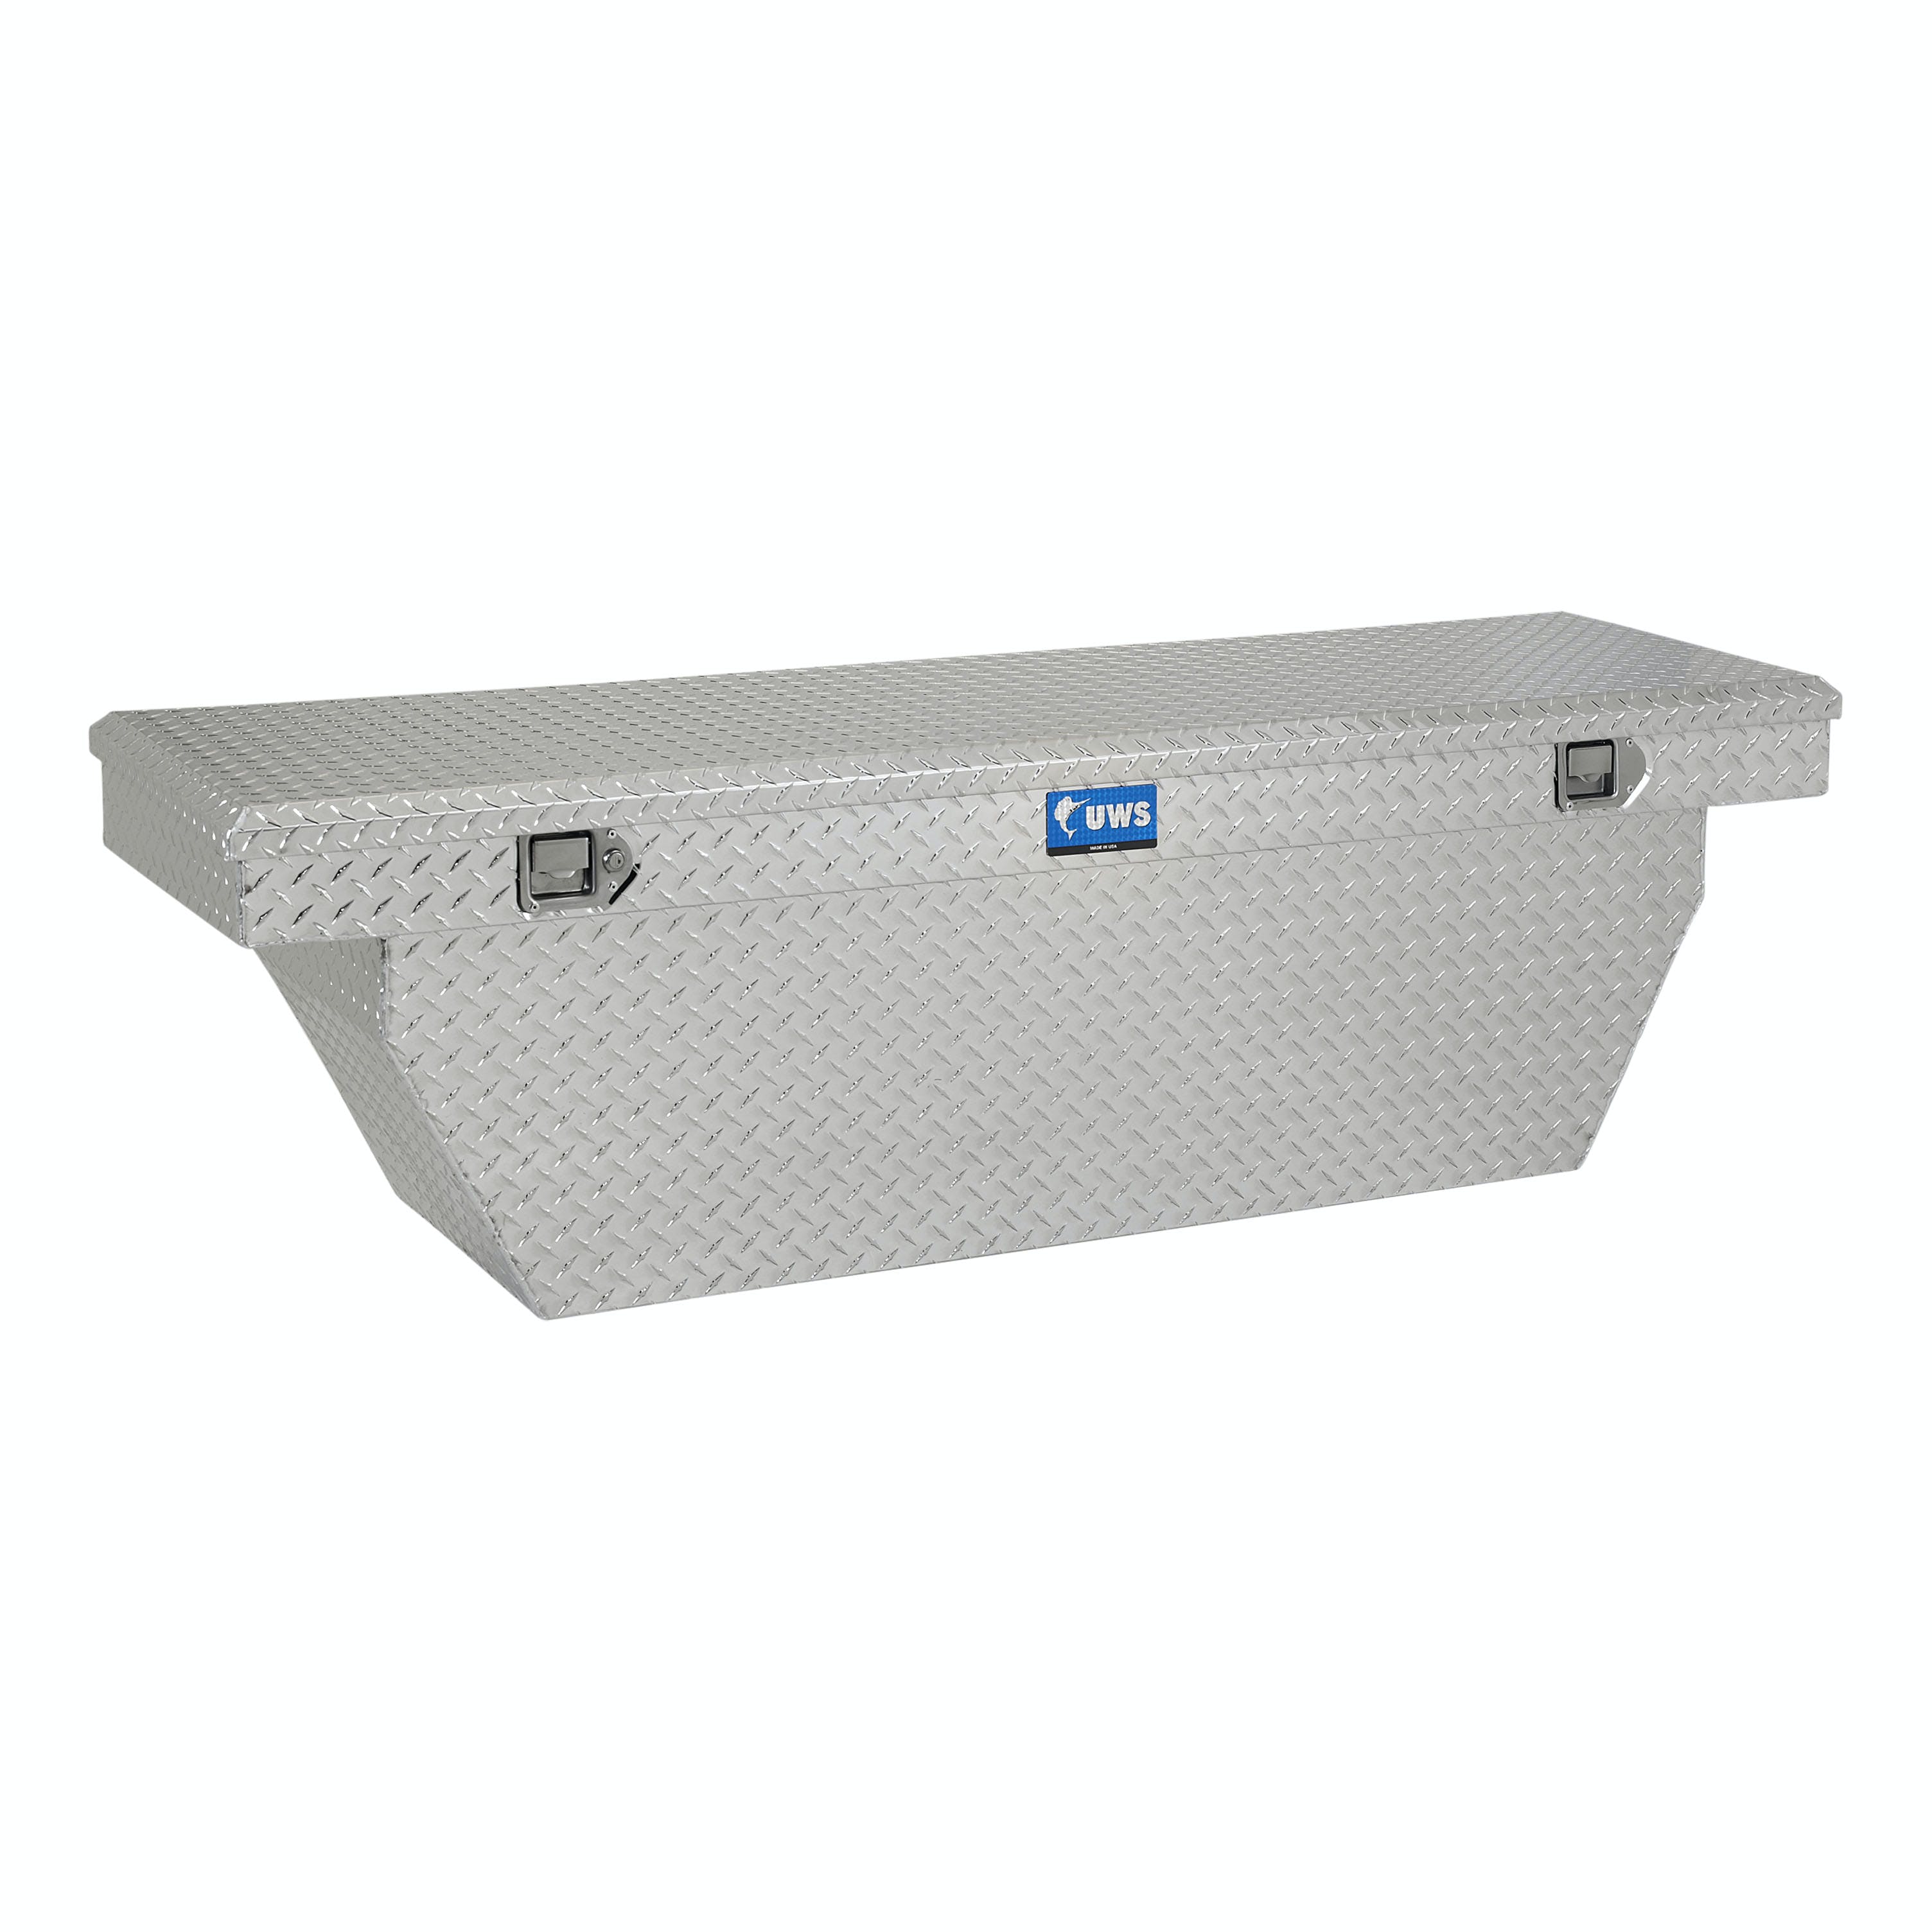 UWS TBSD-72-A 72 inch Aluminum Single Lid Crossover Toolbox Deep Angled